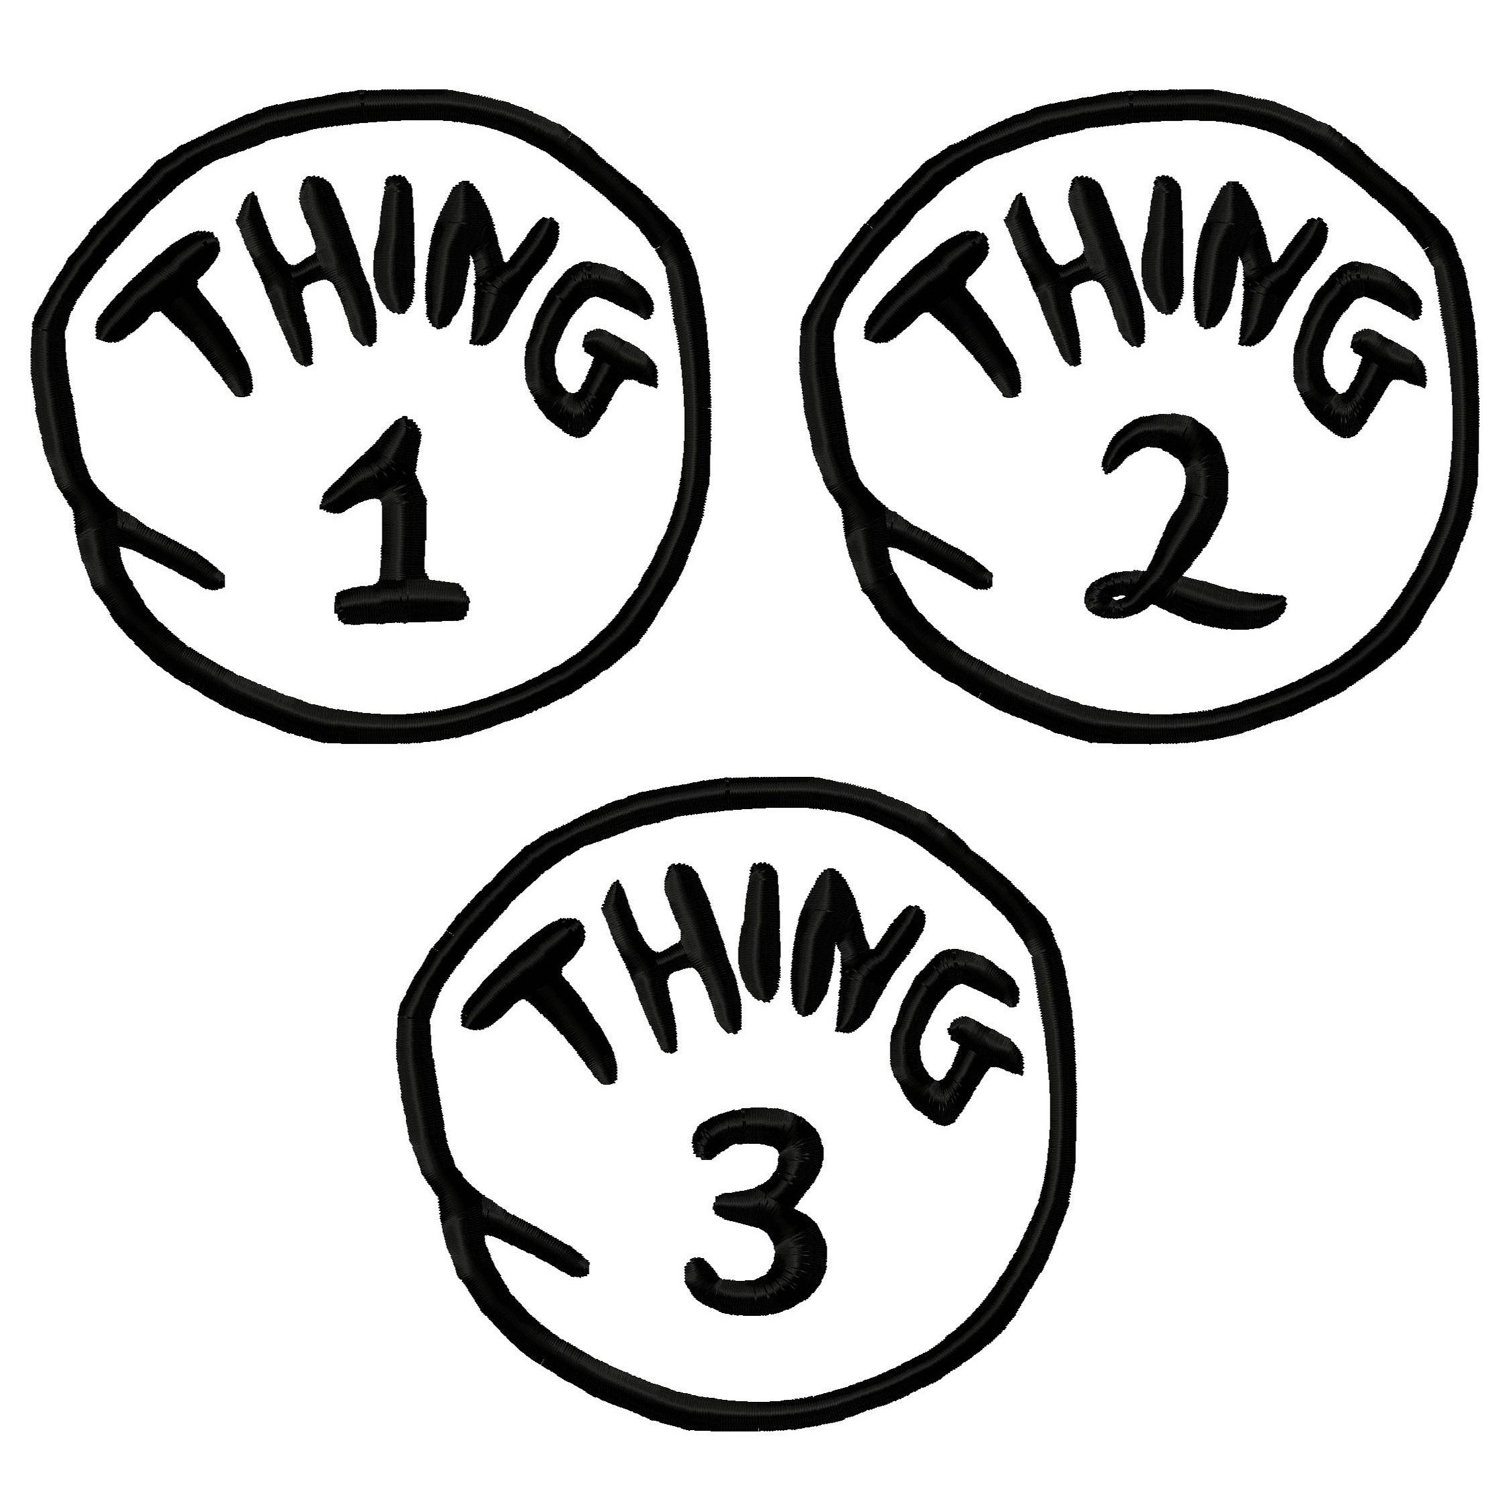 Free Thing 1 And Thing 2 Black And White, Download Free Thing 1 And